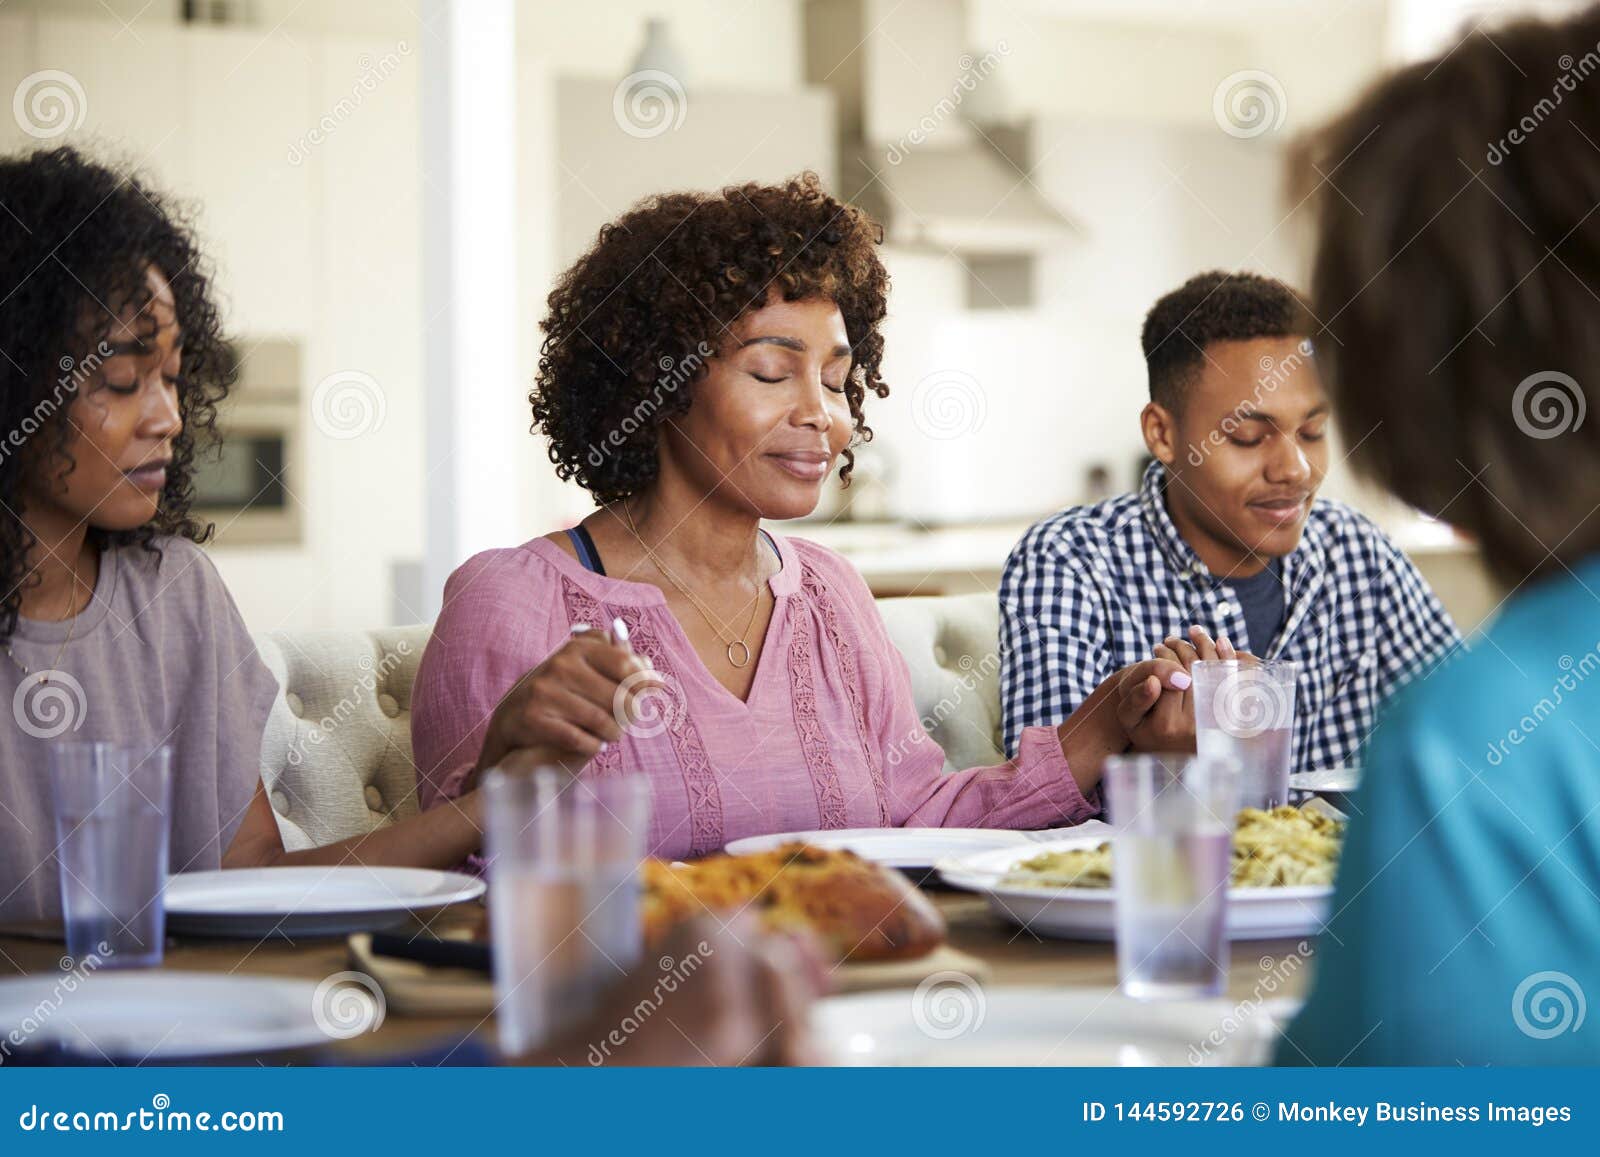 woman sitting at the table holding hands with her young adult children saying grace before dinner